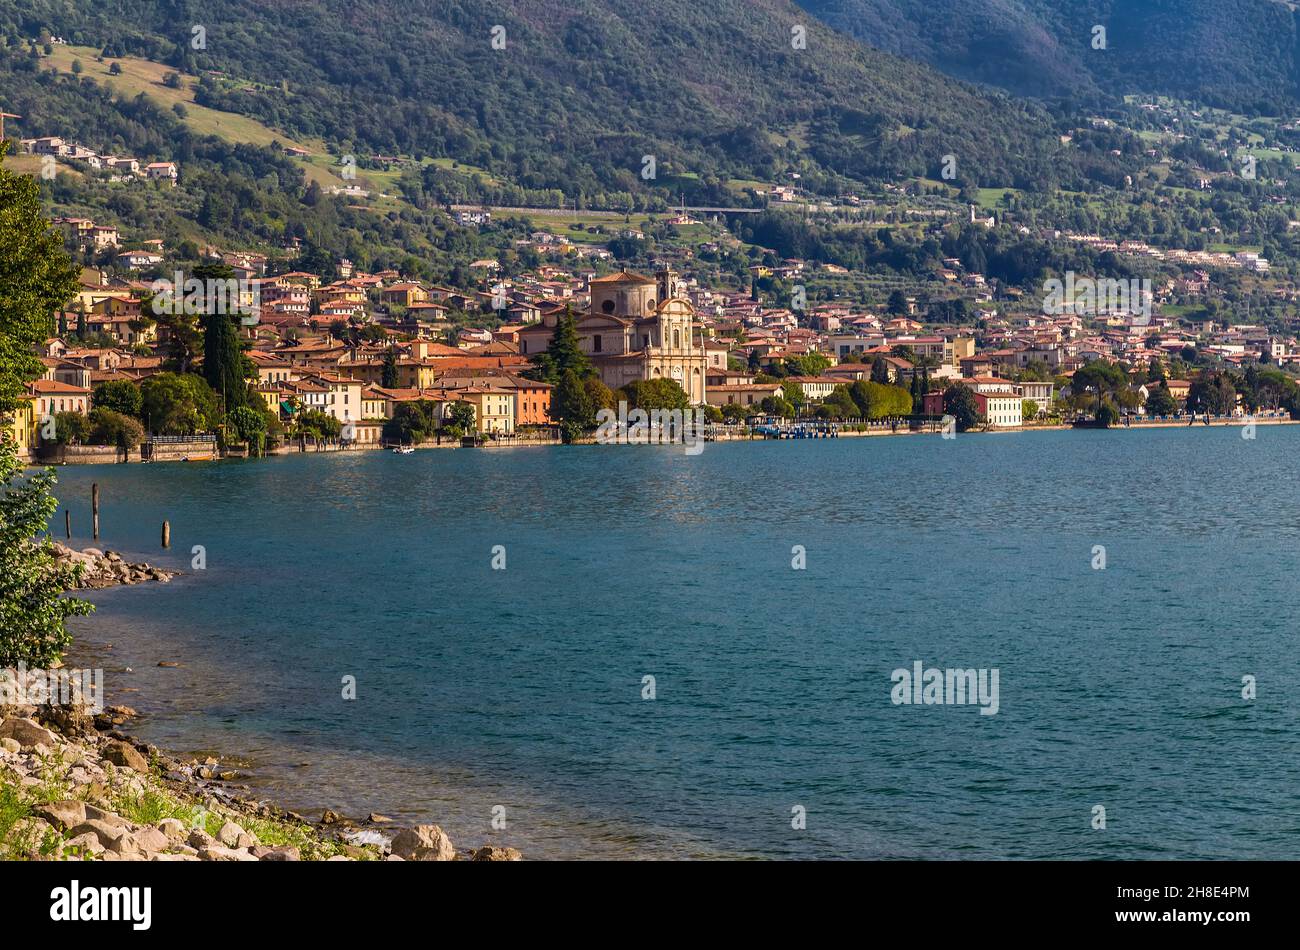 Lake Iseo and a small town on its birch with an ancient church in the center. Sale Marazino. Italy Stock Photo